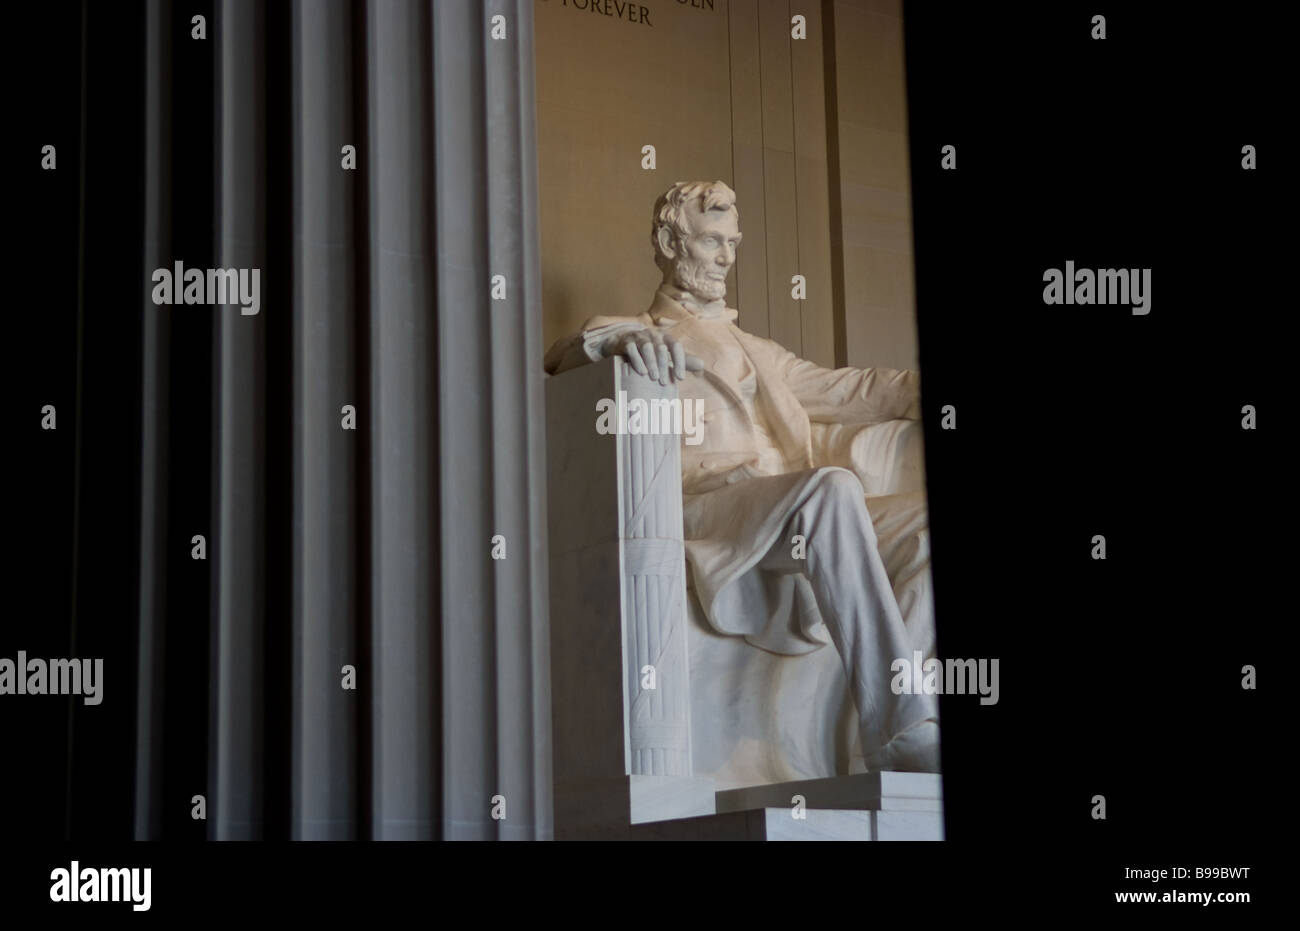 Inside famous Lincoln Monument building with statue of Lincoln in Washington DC USA Stock Photo